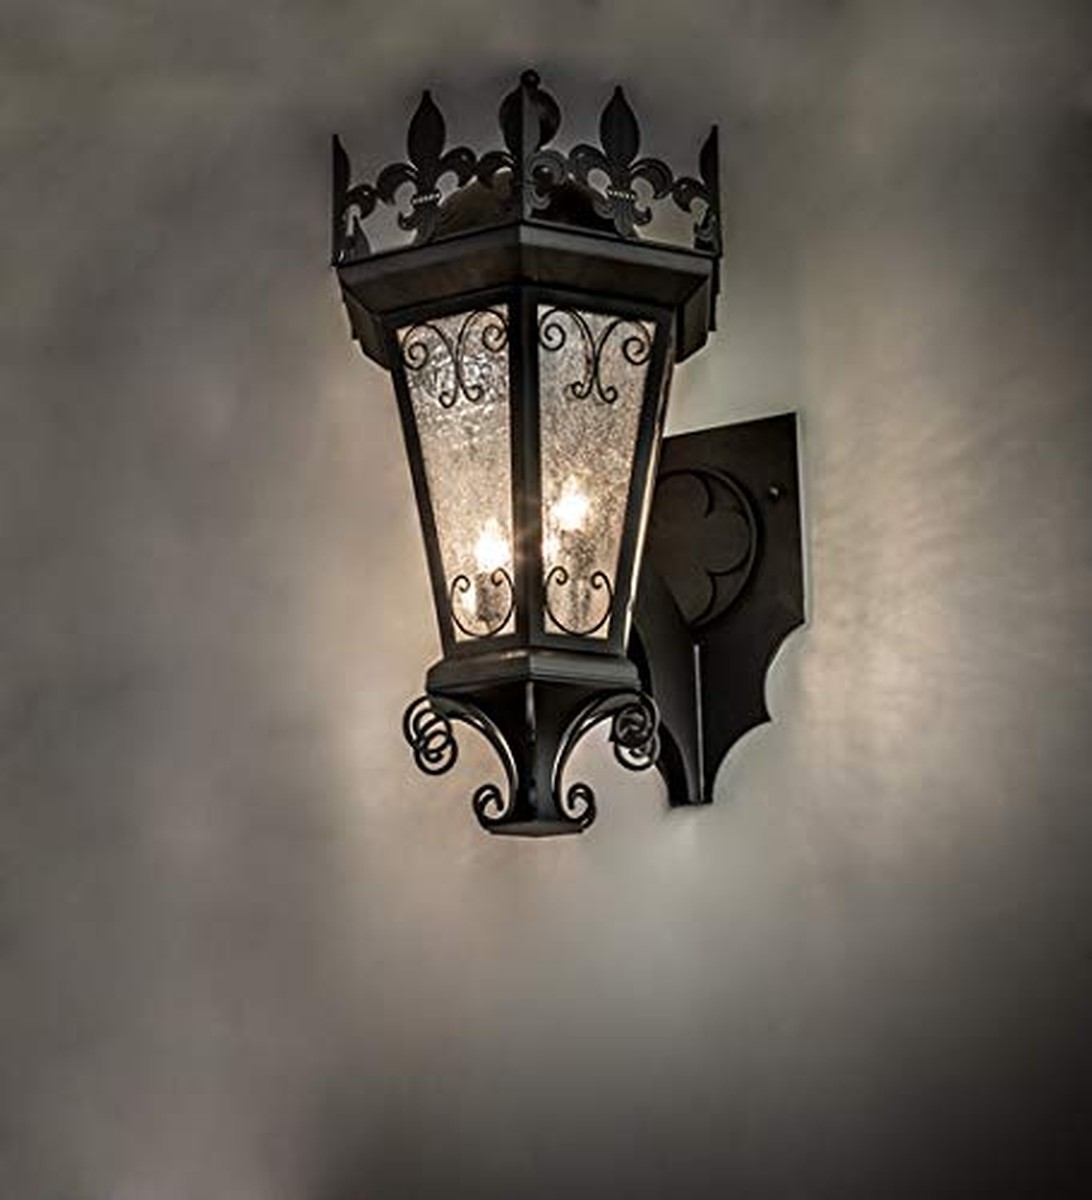 20" Wide Chaumont Wall Sconce